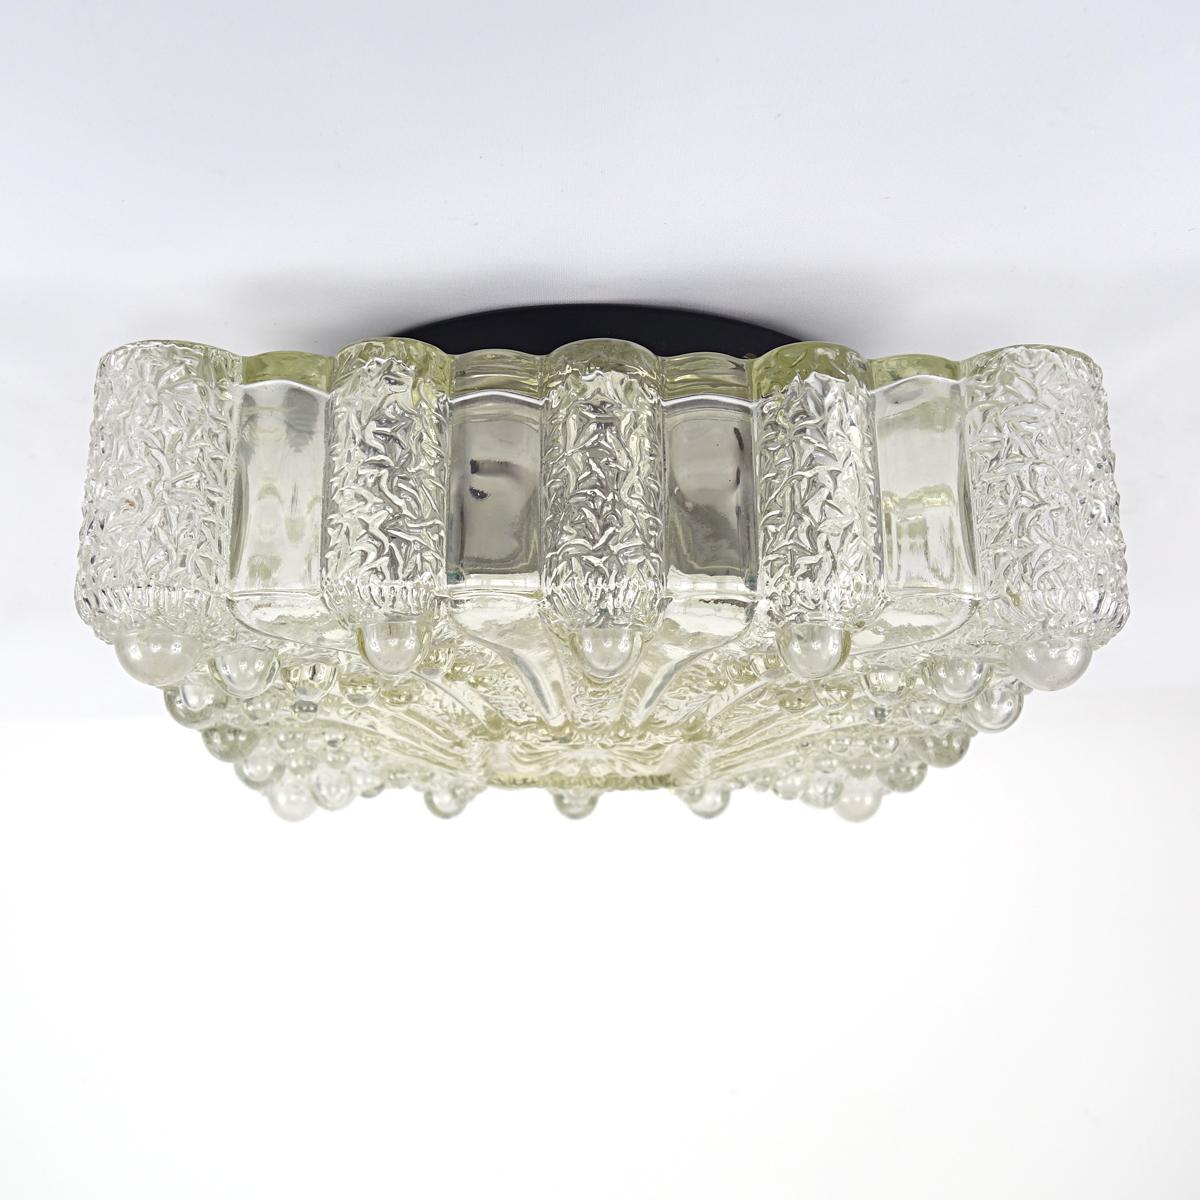 Very decorative square flushmount made of glass by German specialist RZB Leuchten.